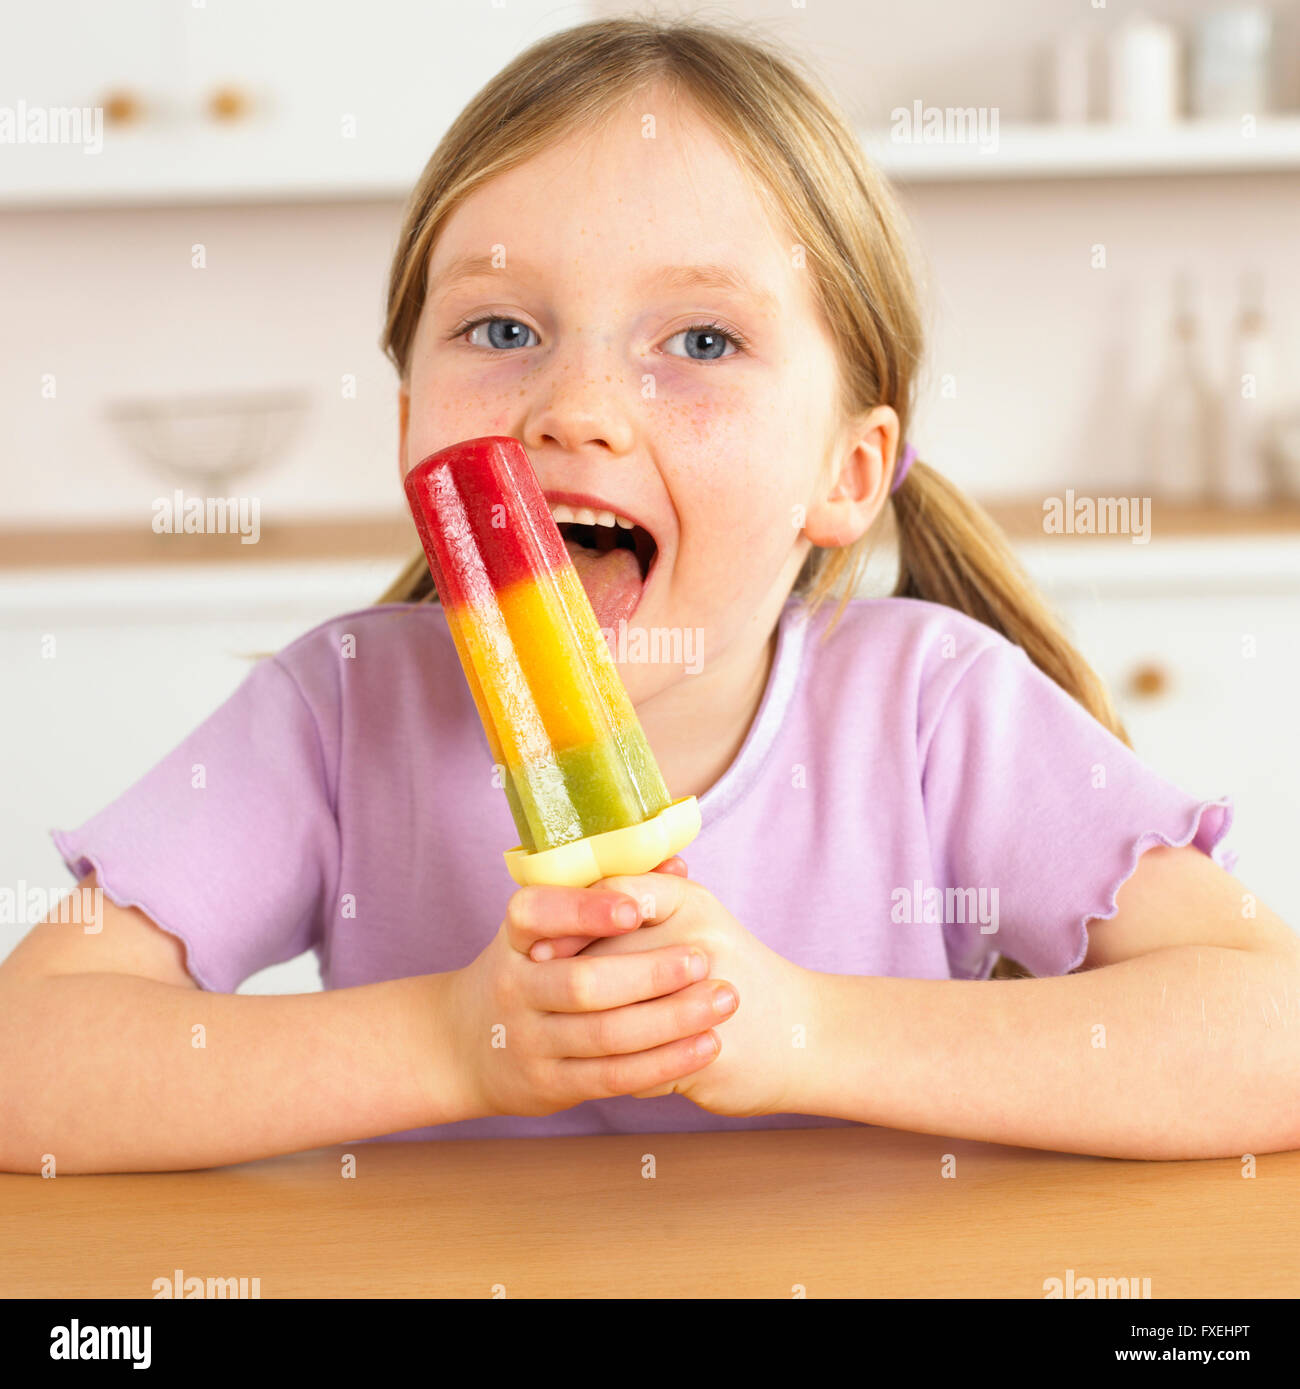 Girl licking an ice lolly Stock Photo